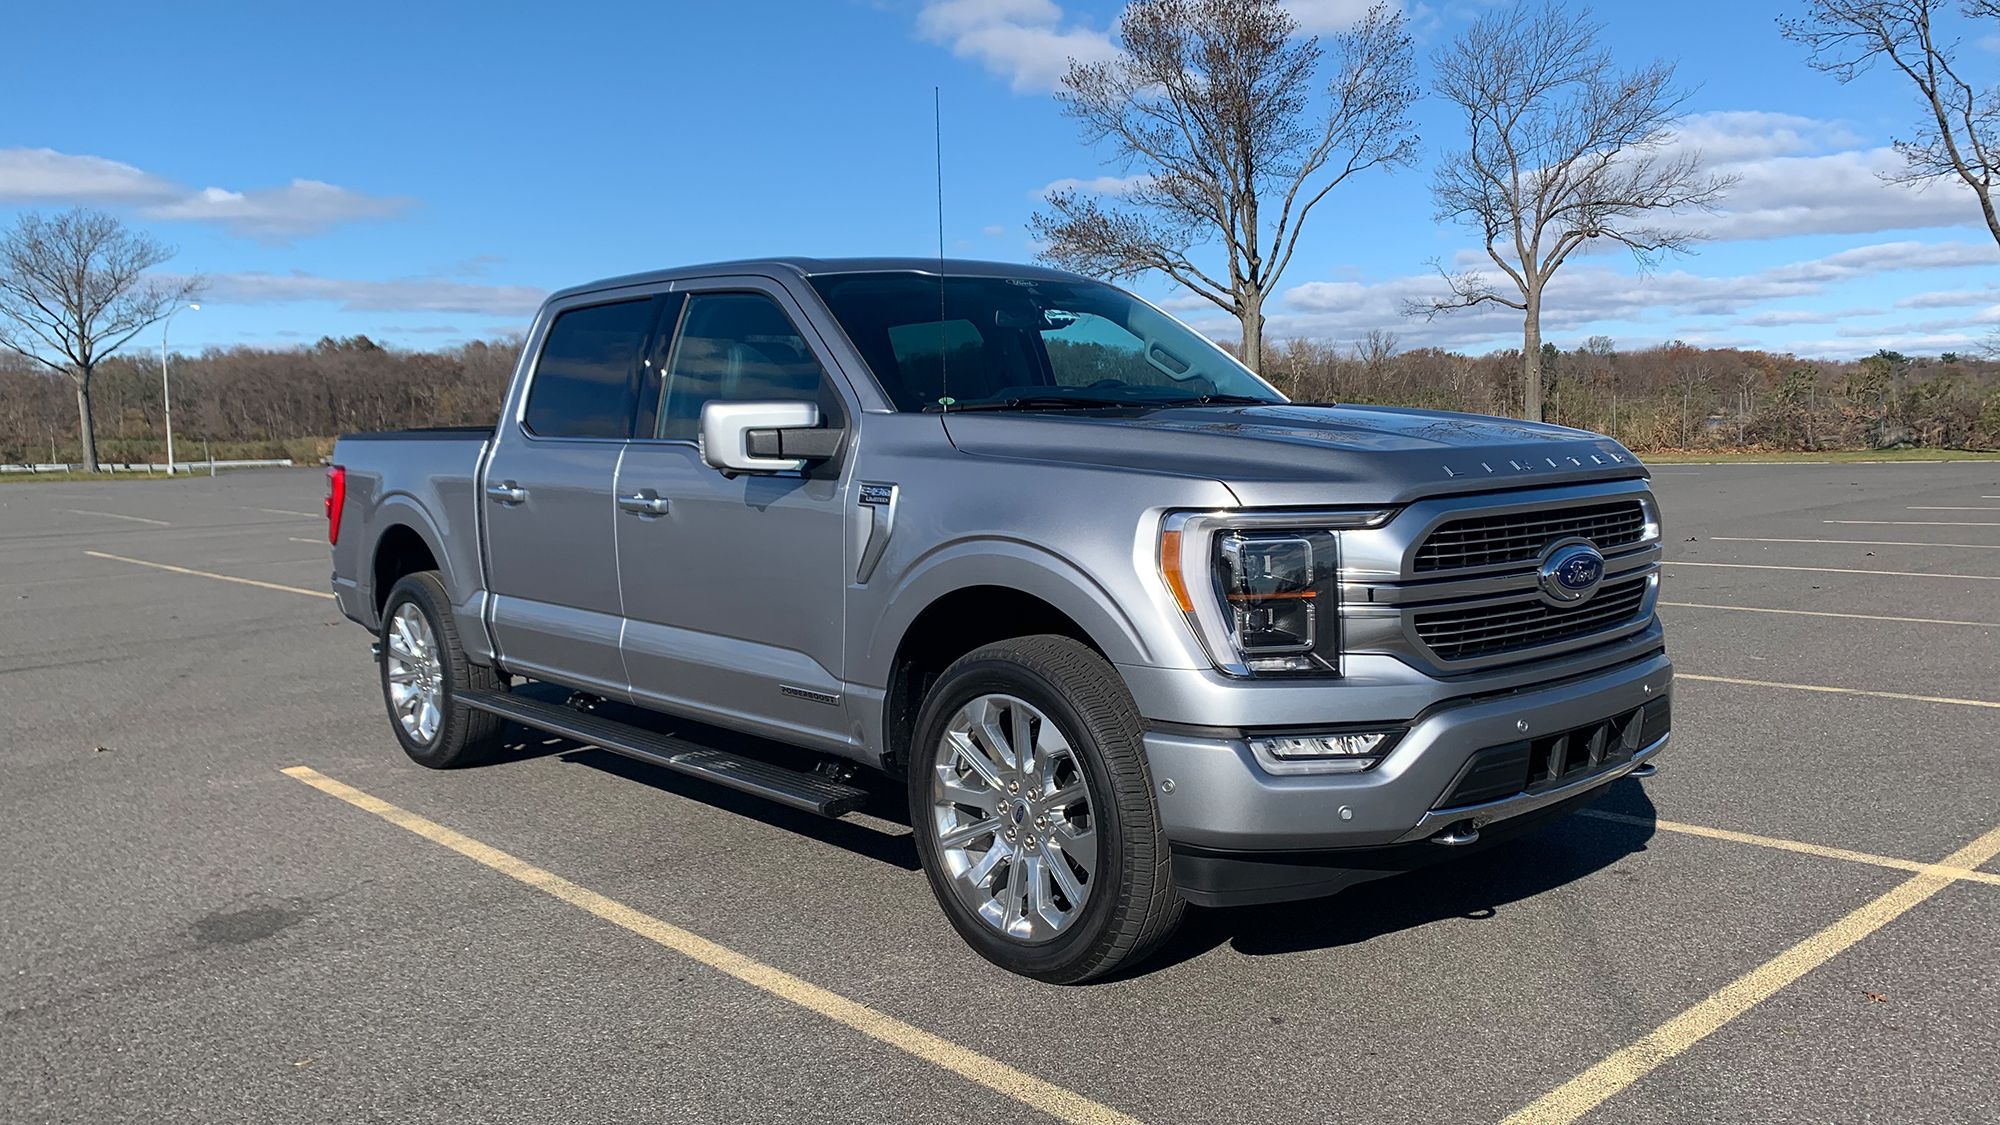 Ford's F-150 hybrid pickup is the ultimate remote workspace and nap pod